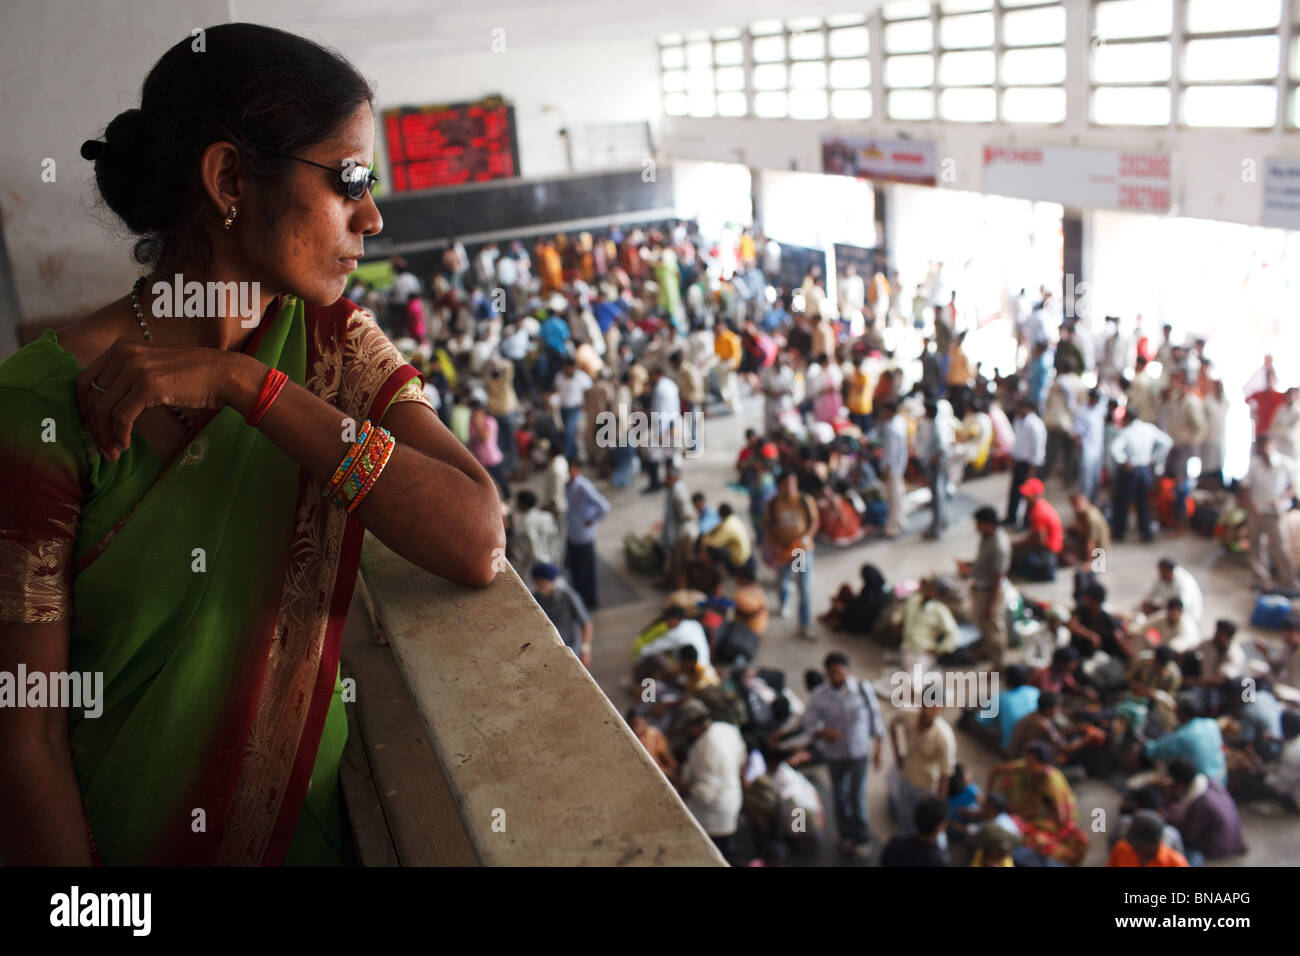 A women watches crowded ticket hall at New Delhi Railway Station in Delhi, India. Stock Photo